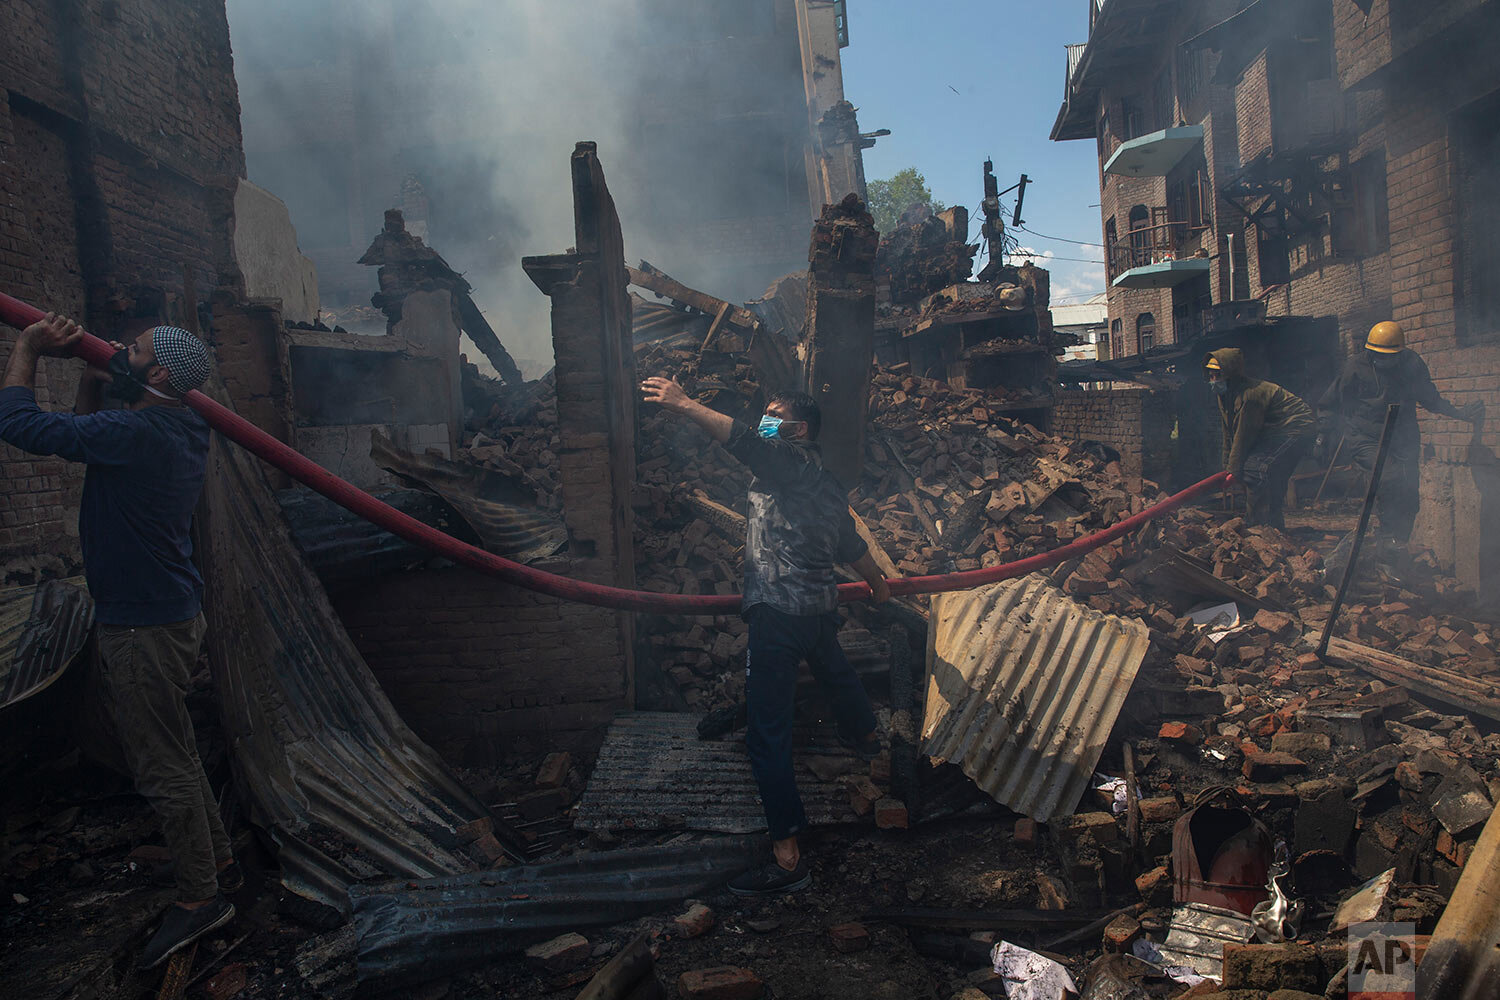  Kashmiri men and firefighters douse a fire in a house which was destroyed in a gunbattle in Srinagar, Indian controlled Kashmir, Tuesday, May 19, 2020. (AP Photo/ Dar Yasin) 